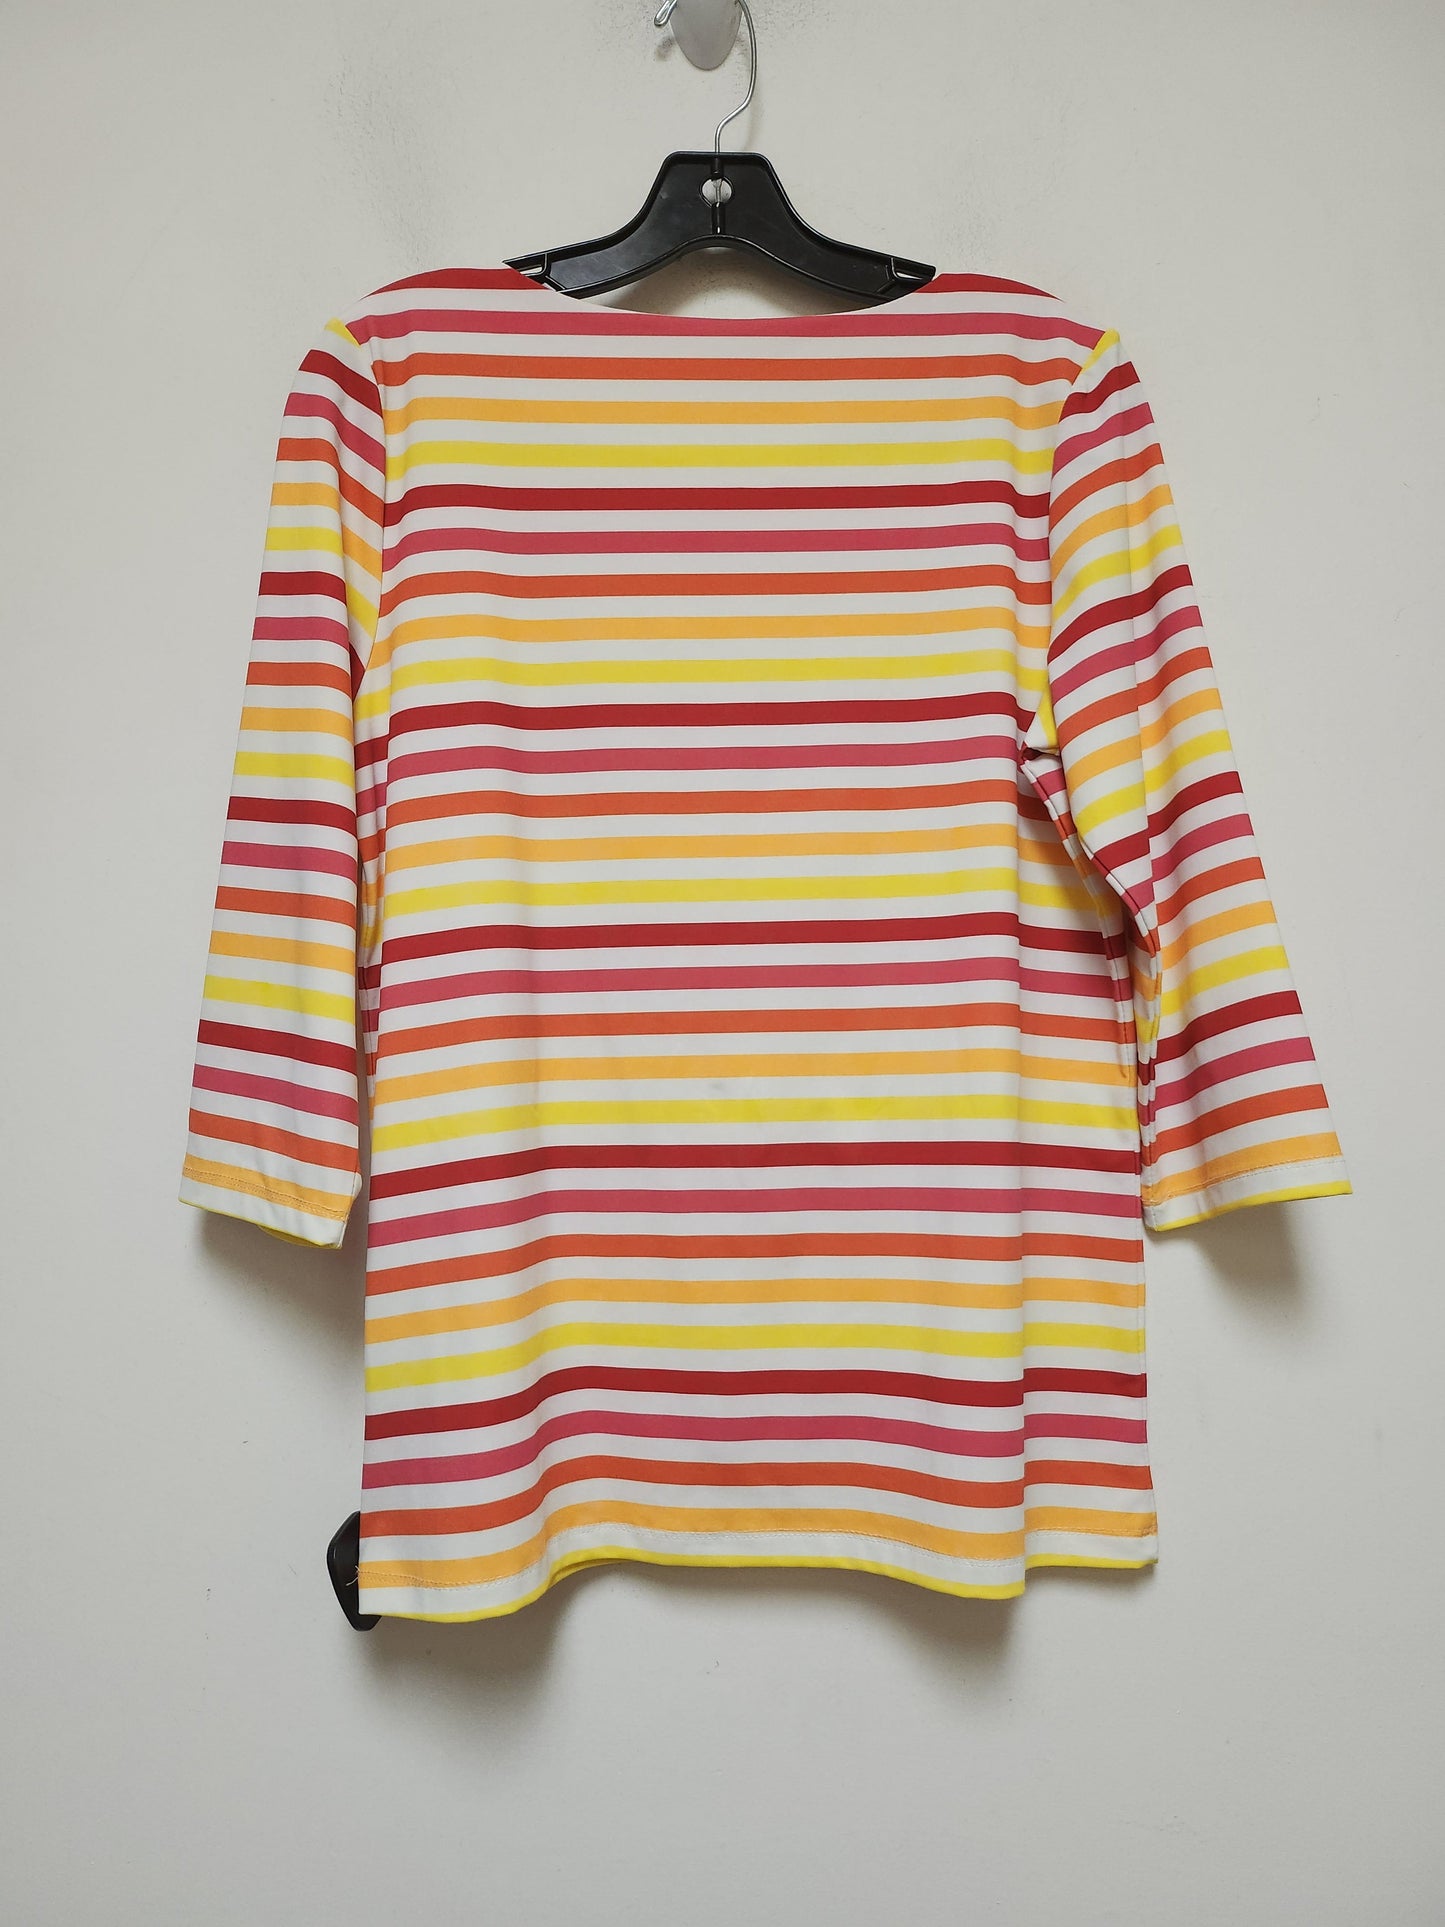 Top Long Sleeve By Peck And Peck  Size: S